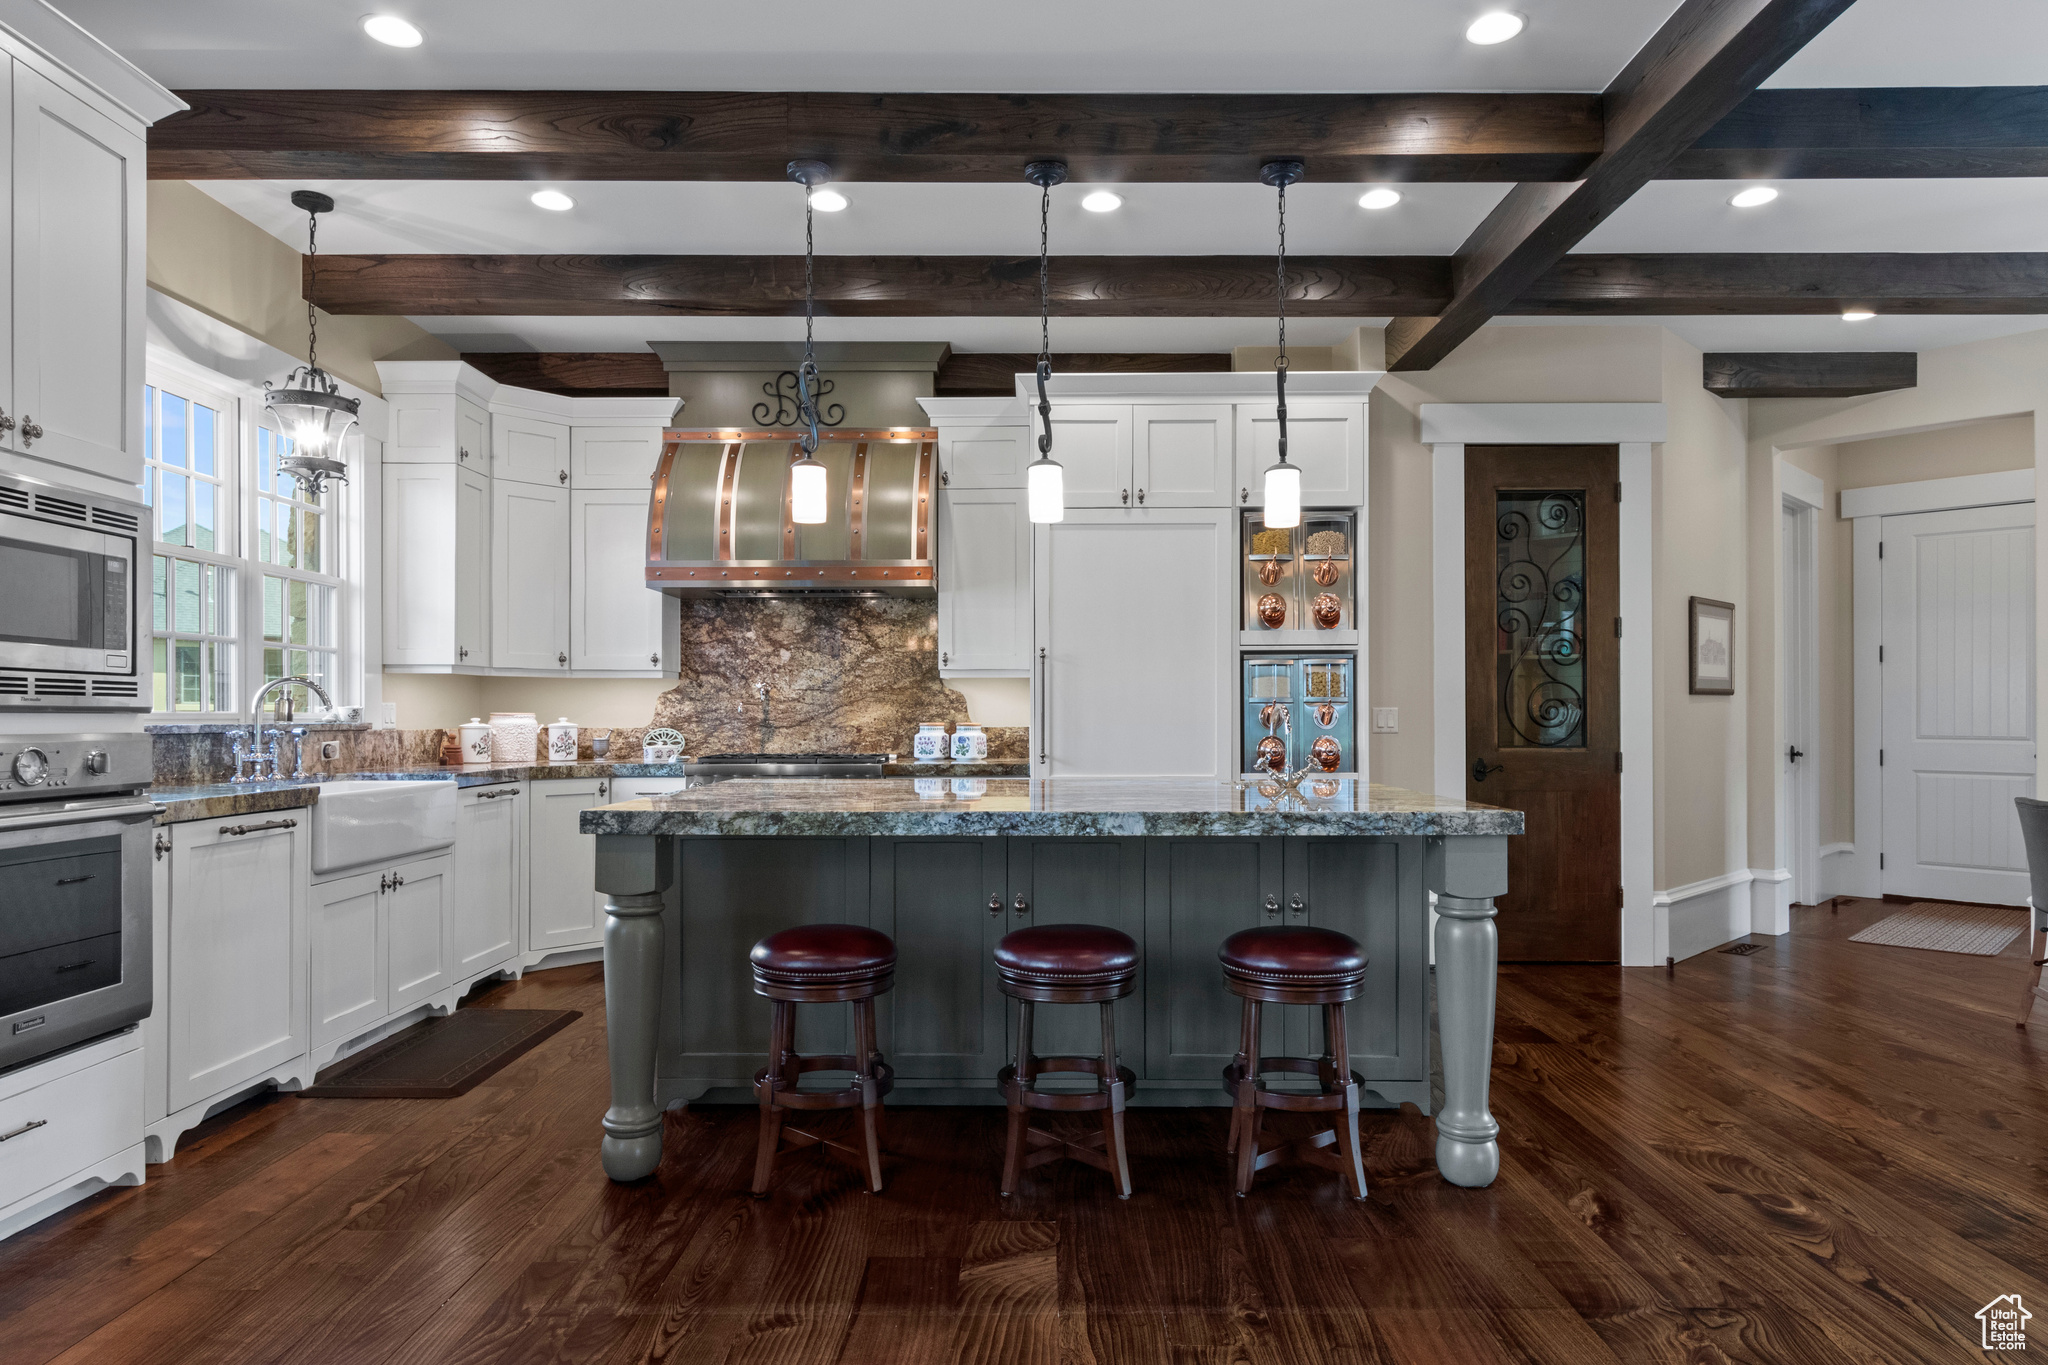 Kitchen featuring pendant lighting and a kitchen bar